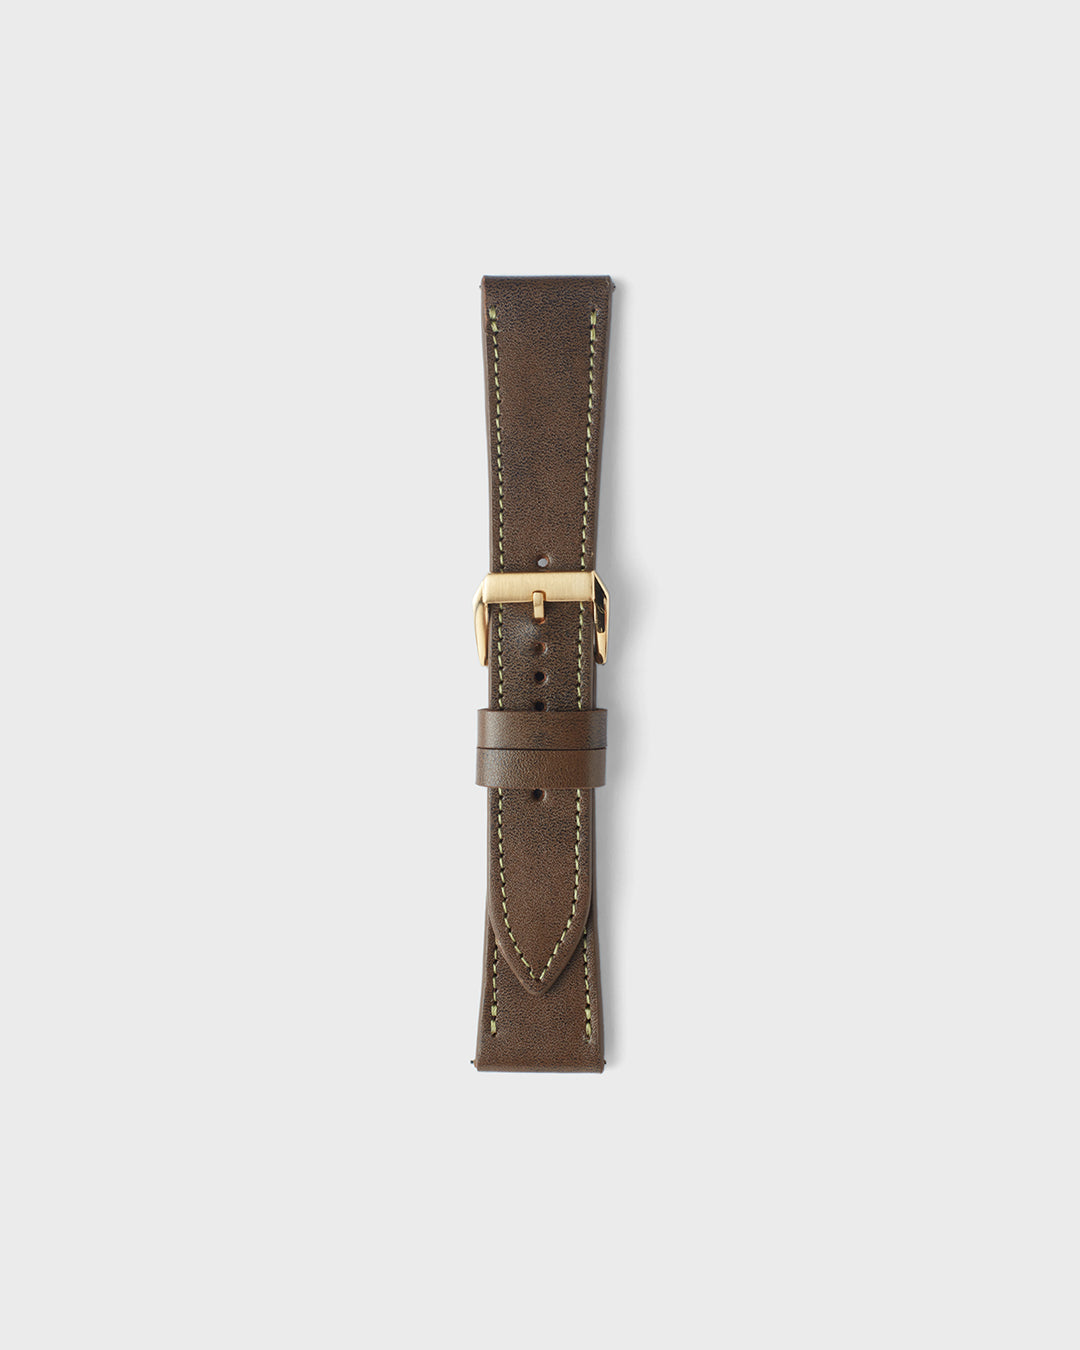 INTRO STRAP - FOR QUARTZ, MECHANICAL & SMART WATCHES [Parade Stitch in Fine Indian Leather] My Store